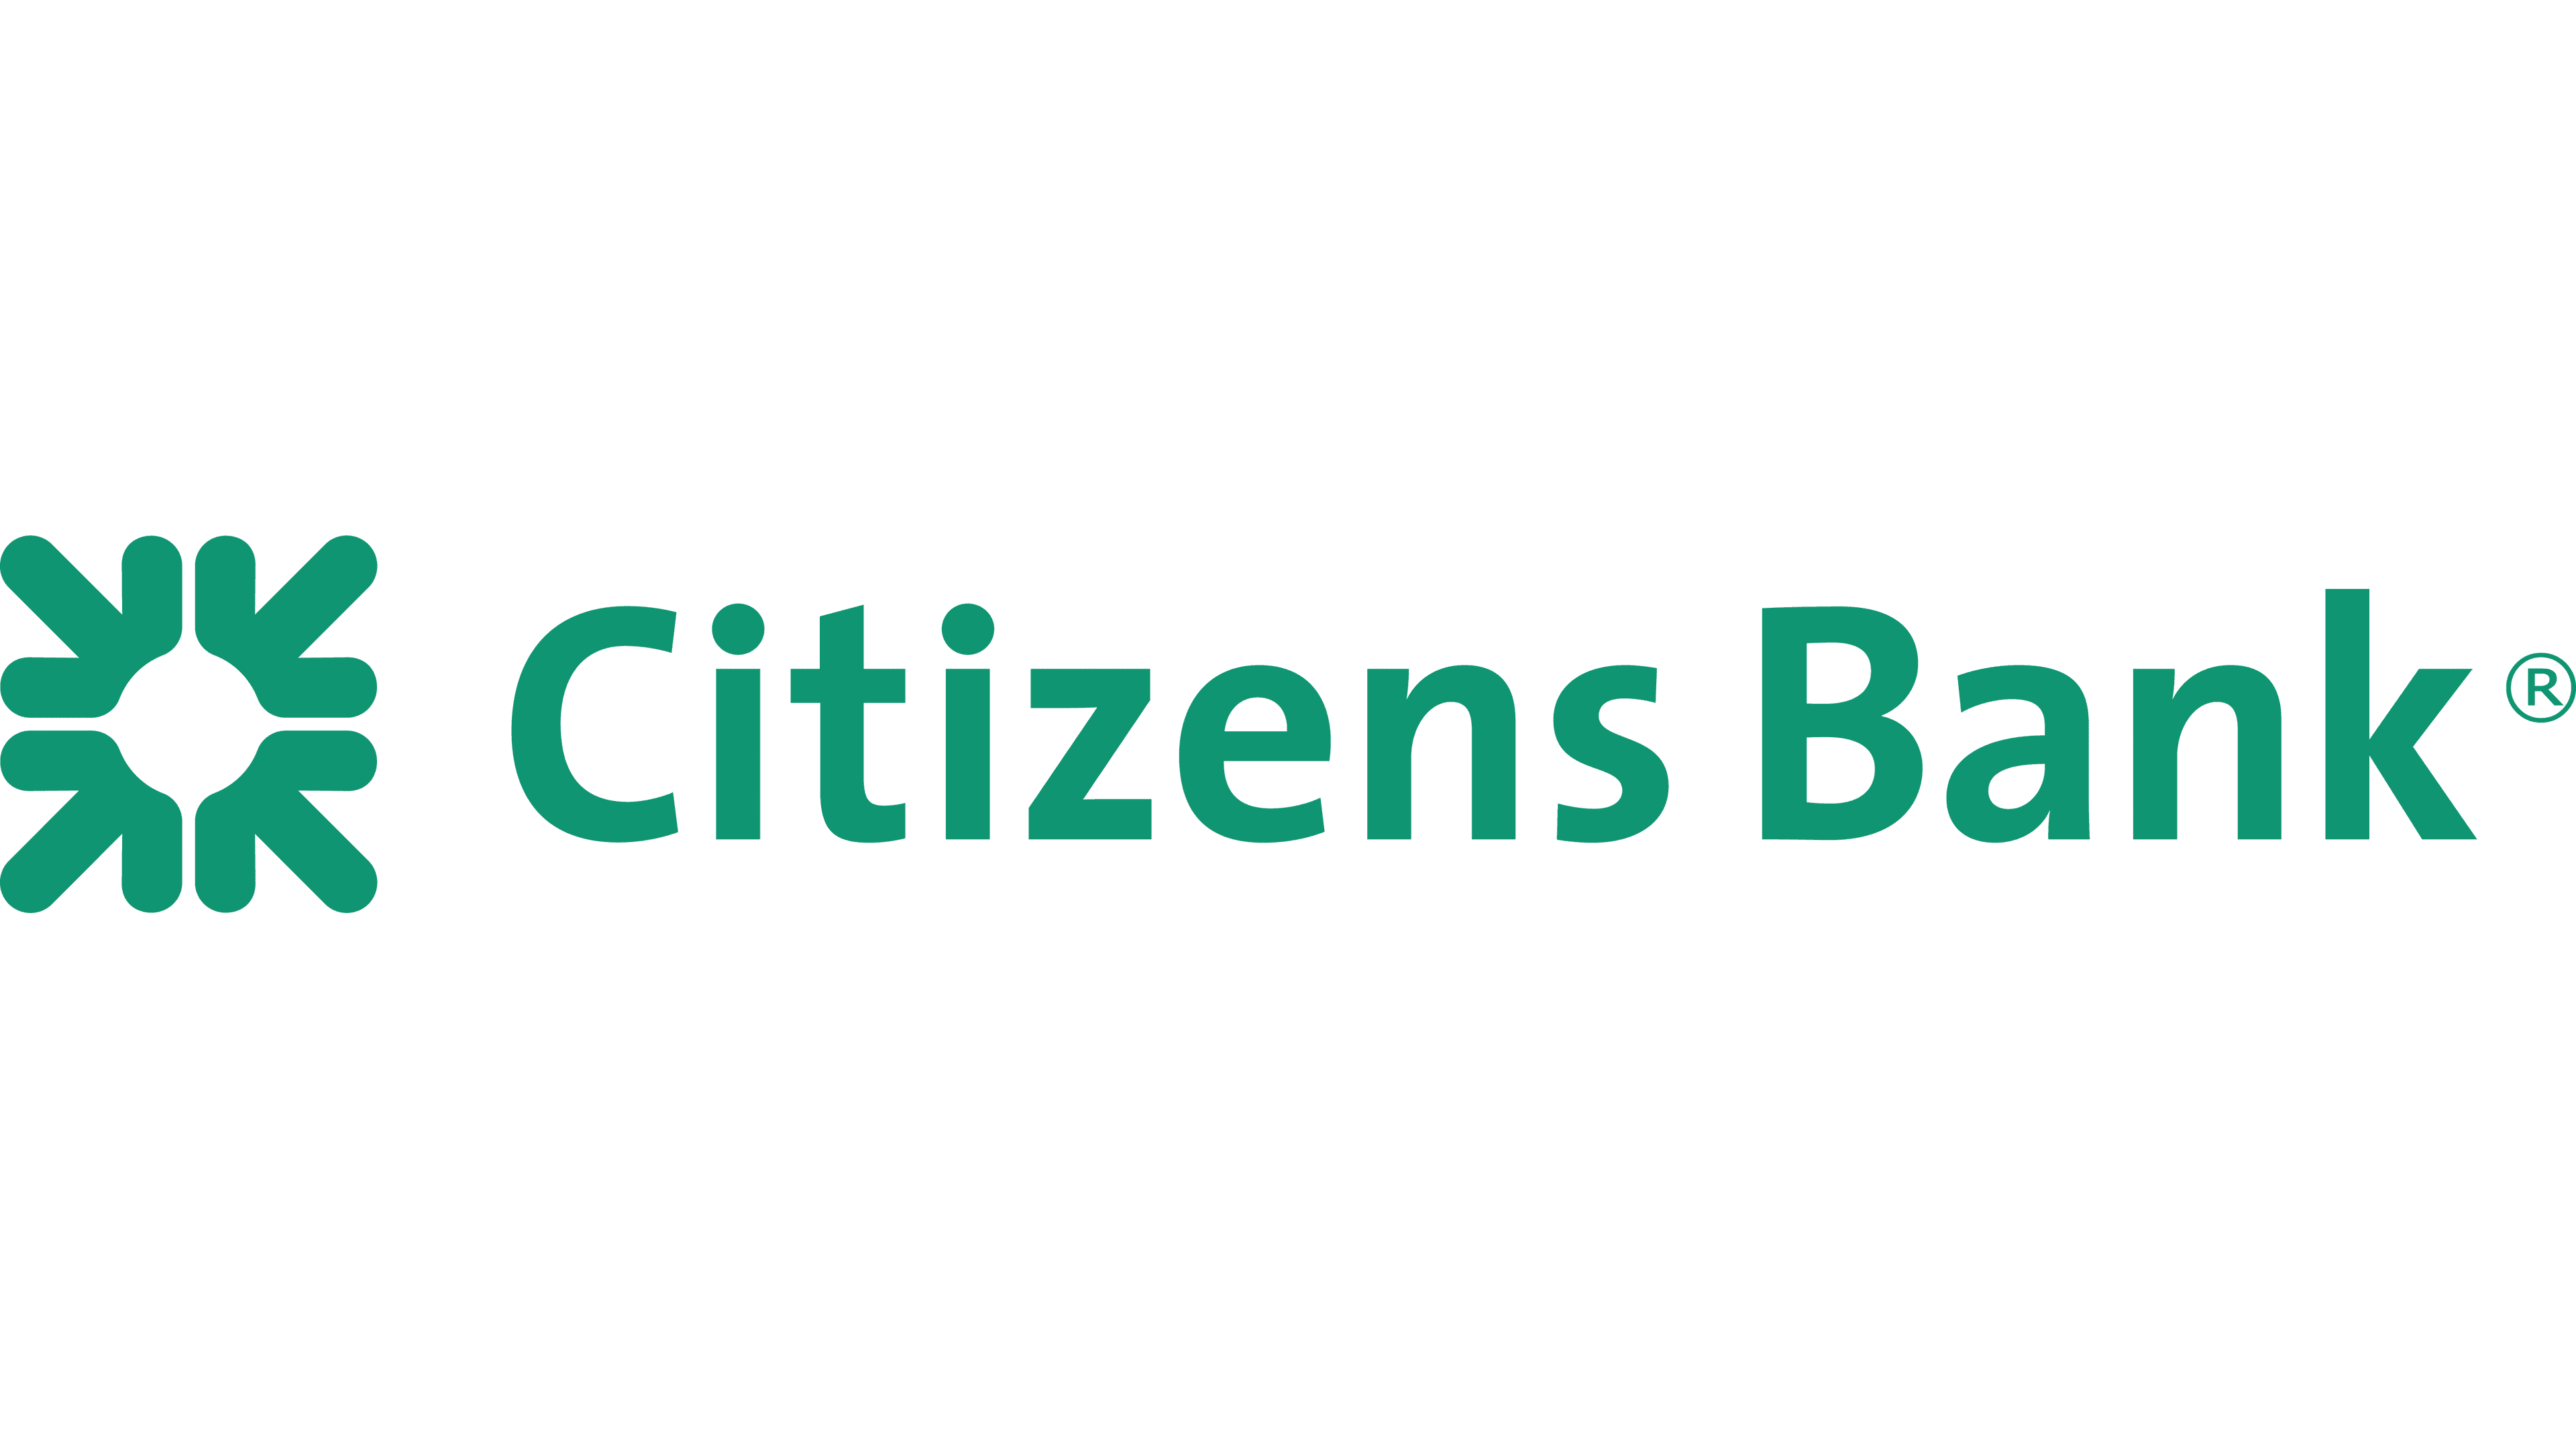 Citizens Bank logo and symbol, meaning, history, PNG